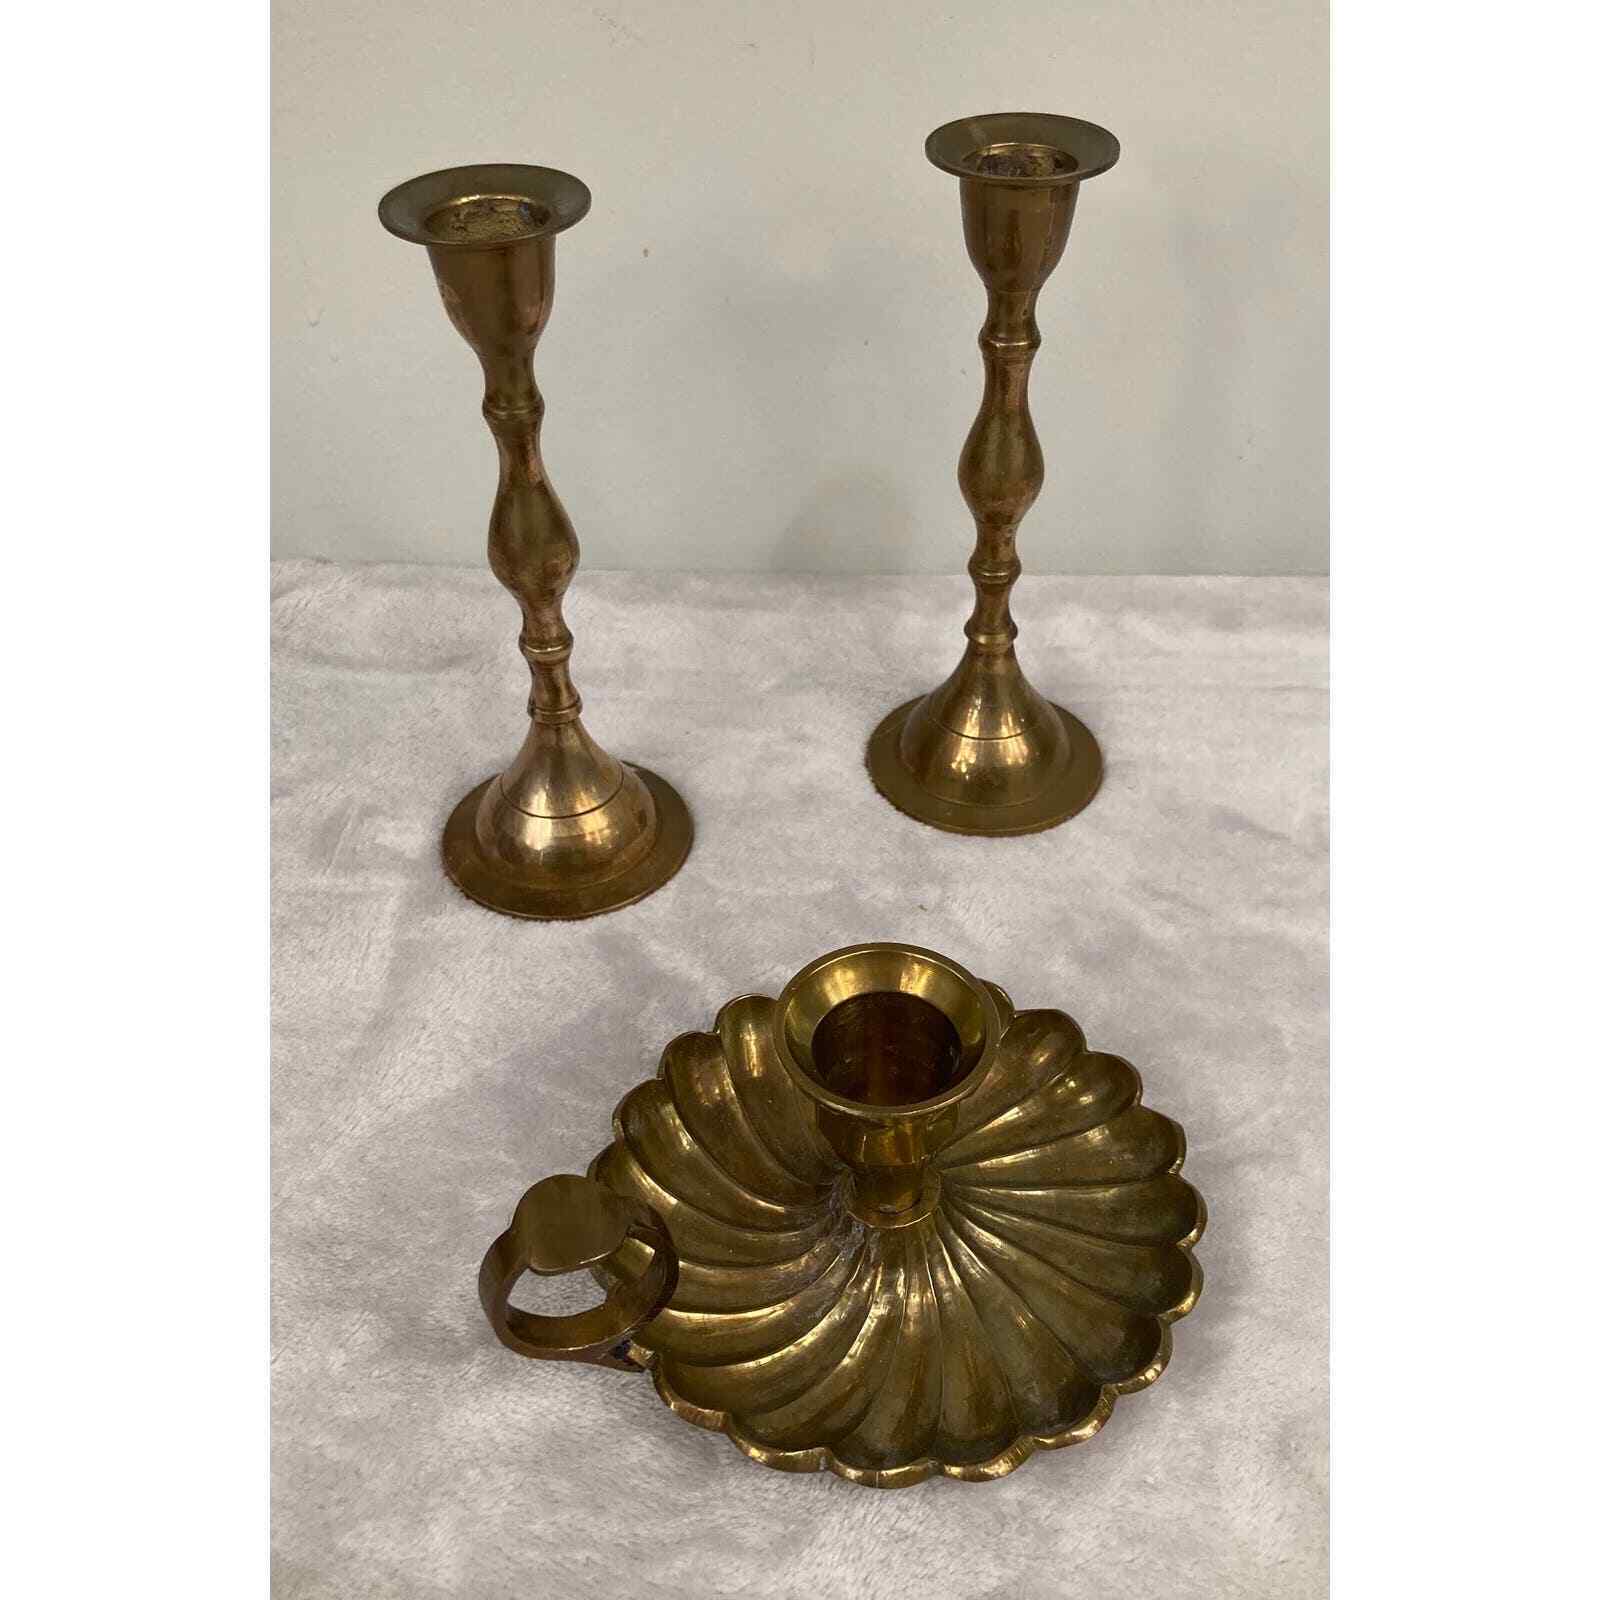 Vintage Solid Brass Taper Candlestick Holders Brass Candle holders Set of 3 